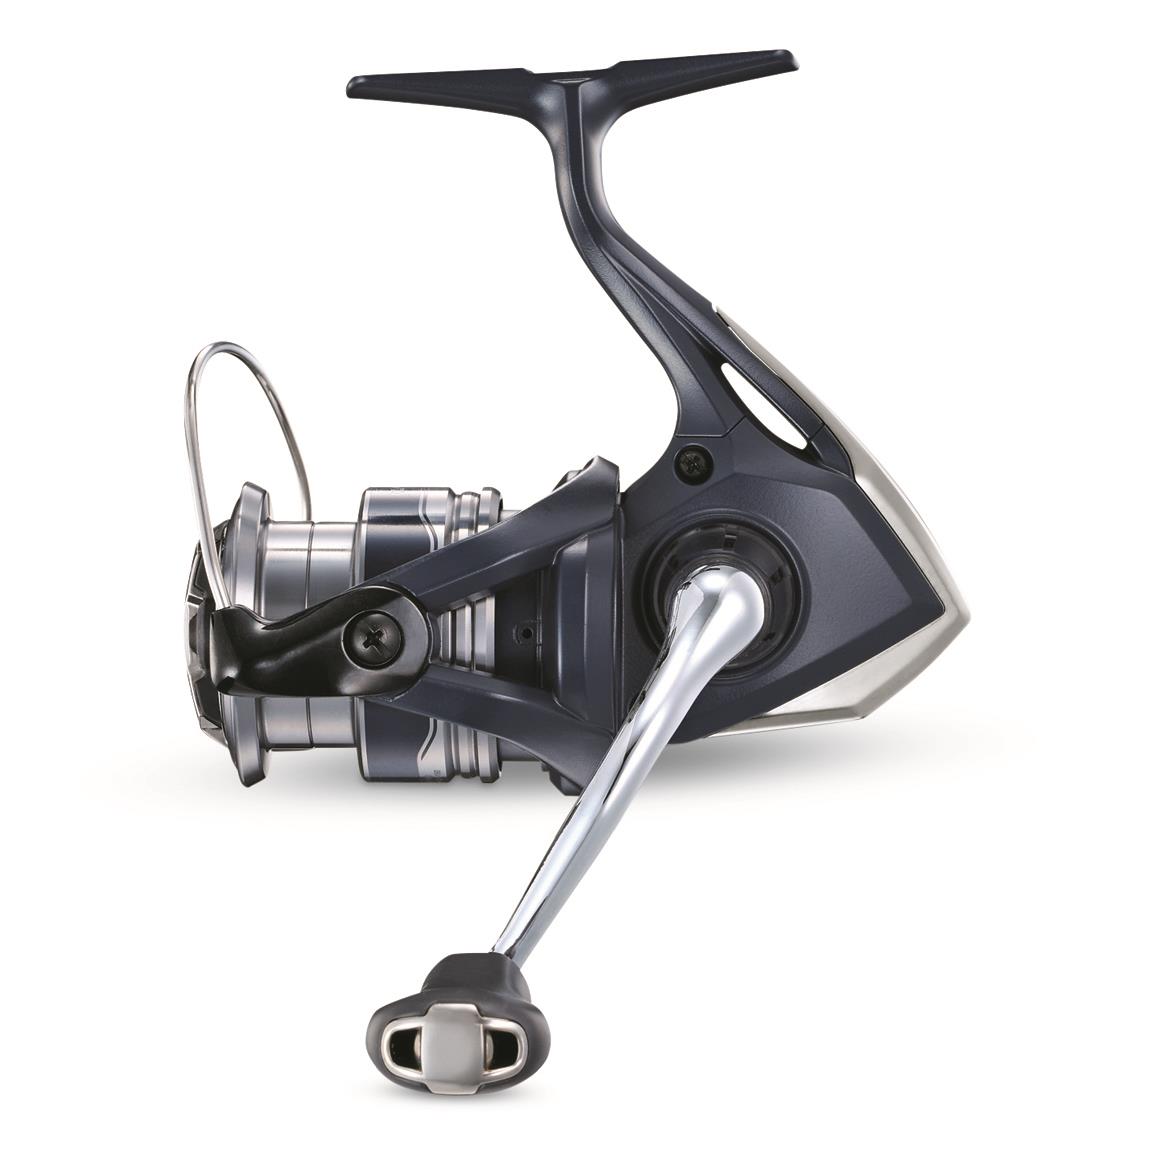 Shimano Catana FE Spinning Reel, Size 1000, 5.0:1 Gear Ratio - 730516, Spinning  Reels at Sportsman's Guide